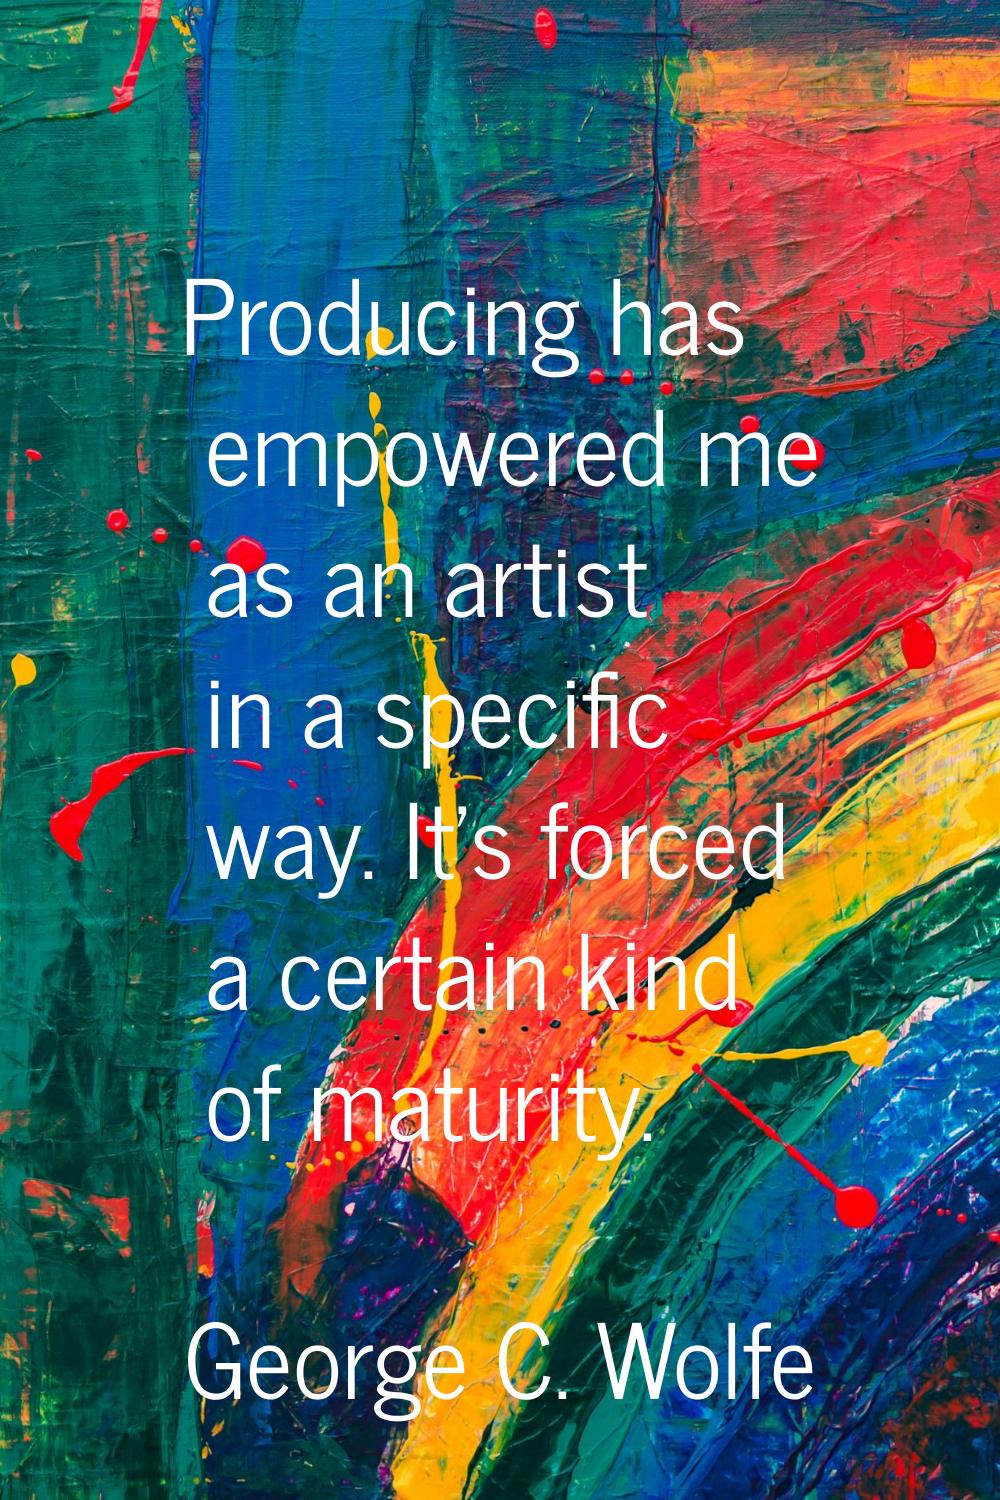 Producing has empowered me as an artist in a specific way. It's forced a certain kind of maturity.